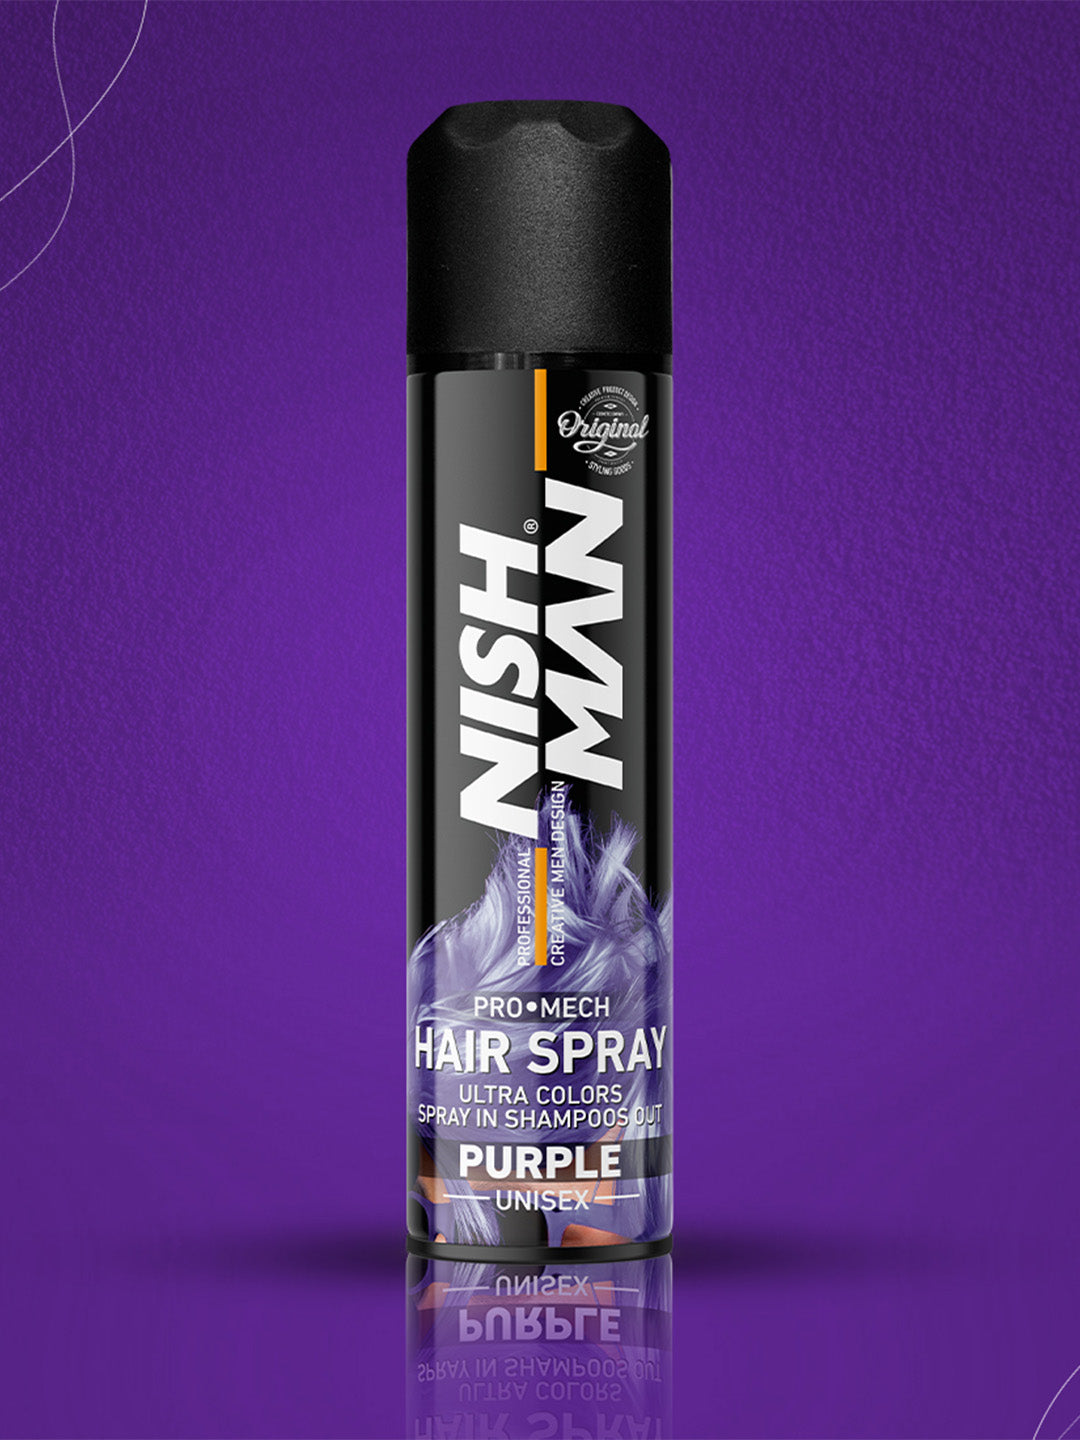 Nishman Professional Hair Color Spray | Cruelty, Peroxide & Ammonia Free |Suitable For Daily Use | Unisex Temporary Hair Color - Purple | 150 ML